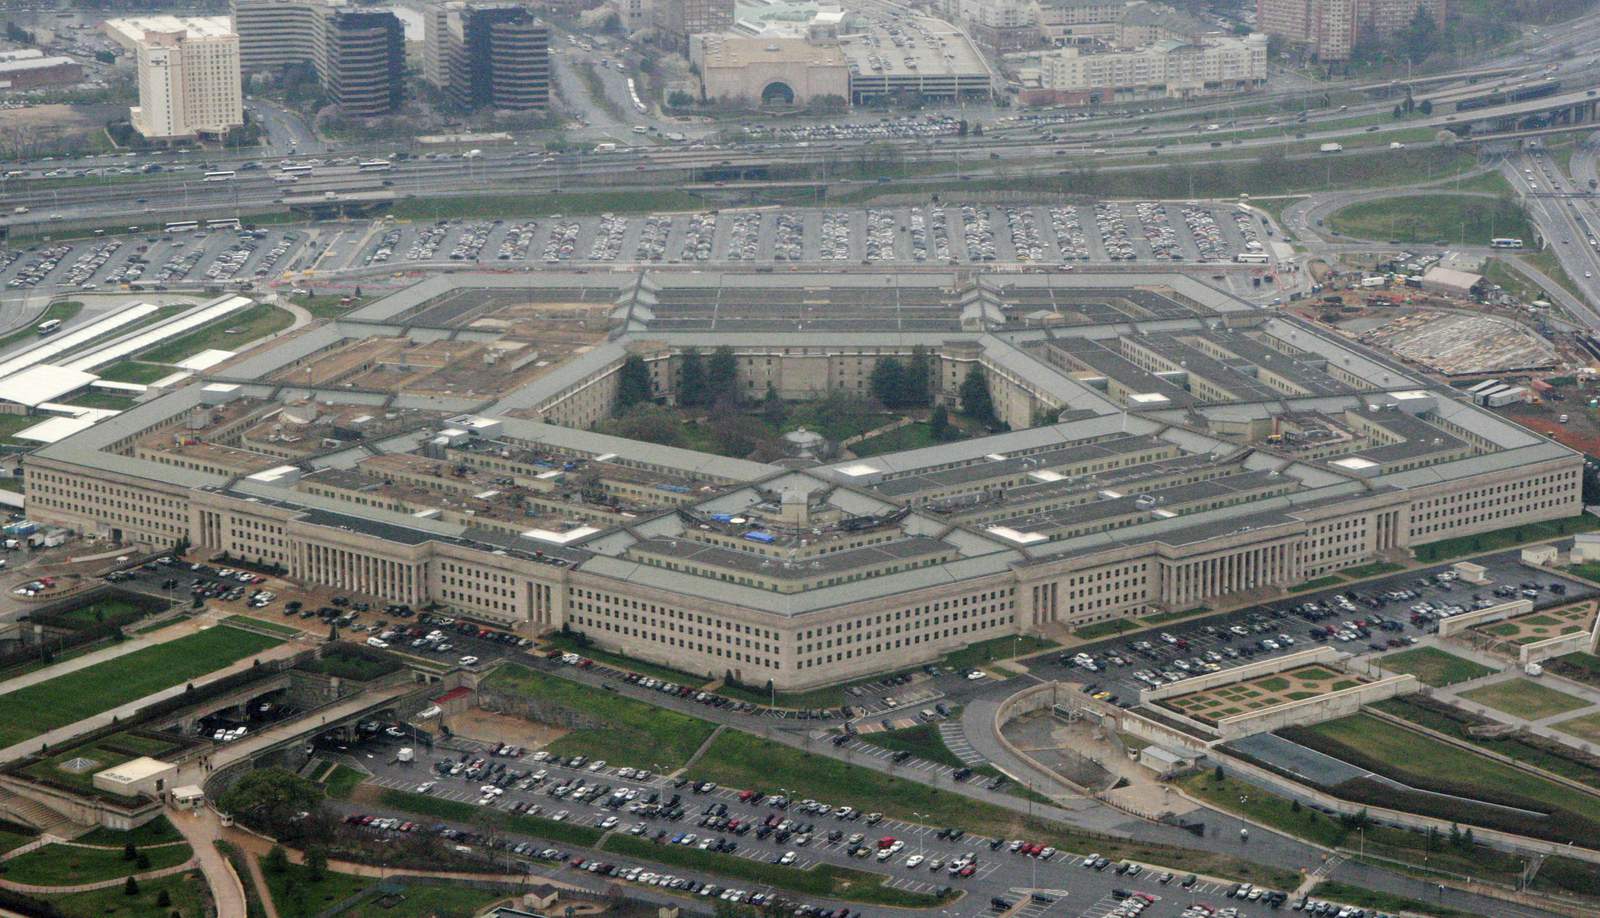 Top Pentagon official tests positive for coronavirus